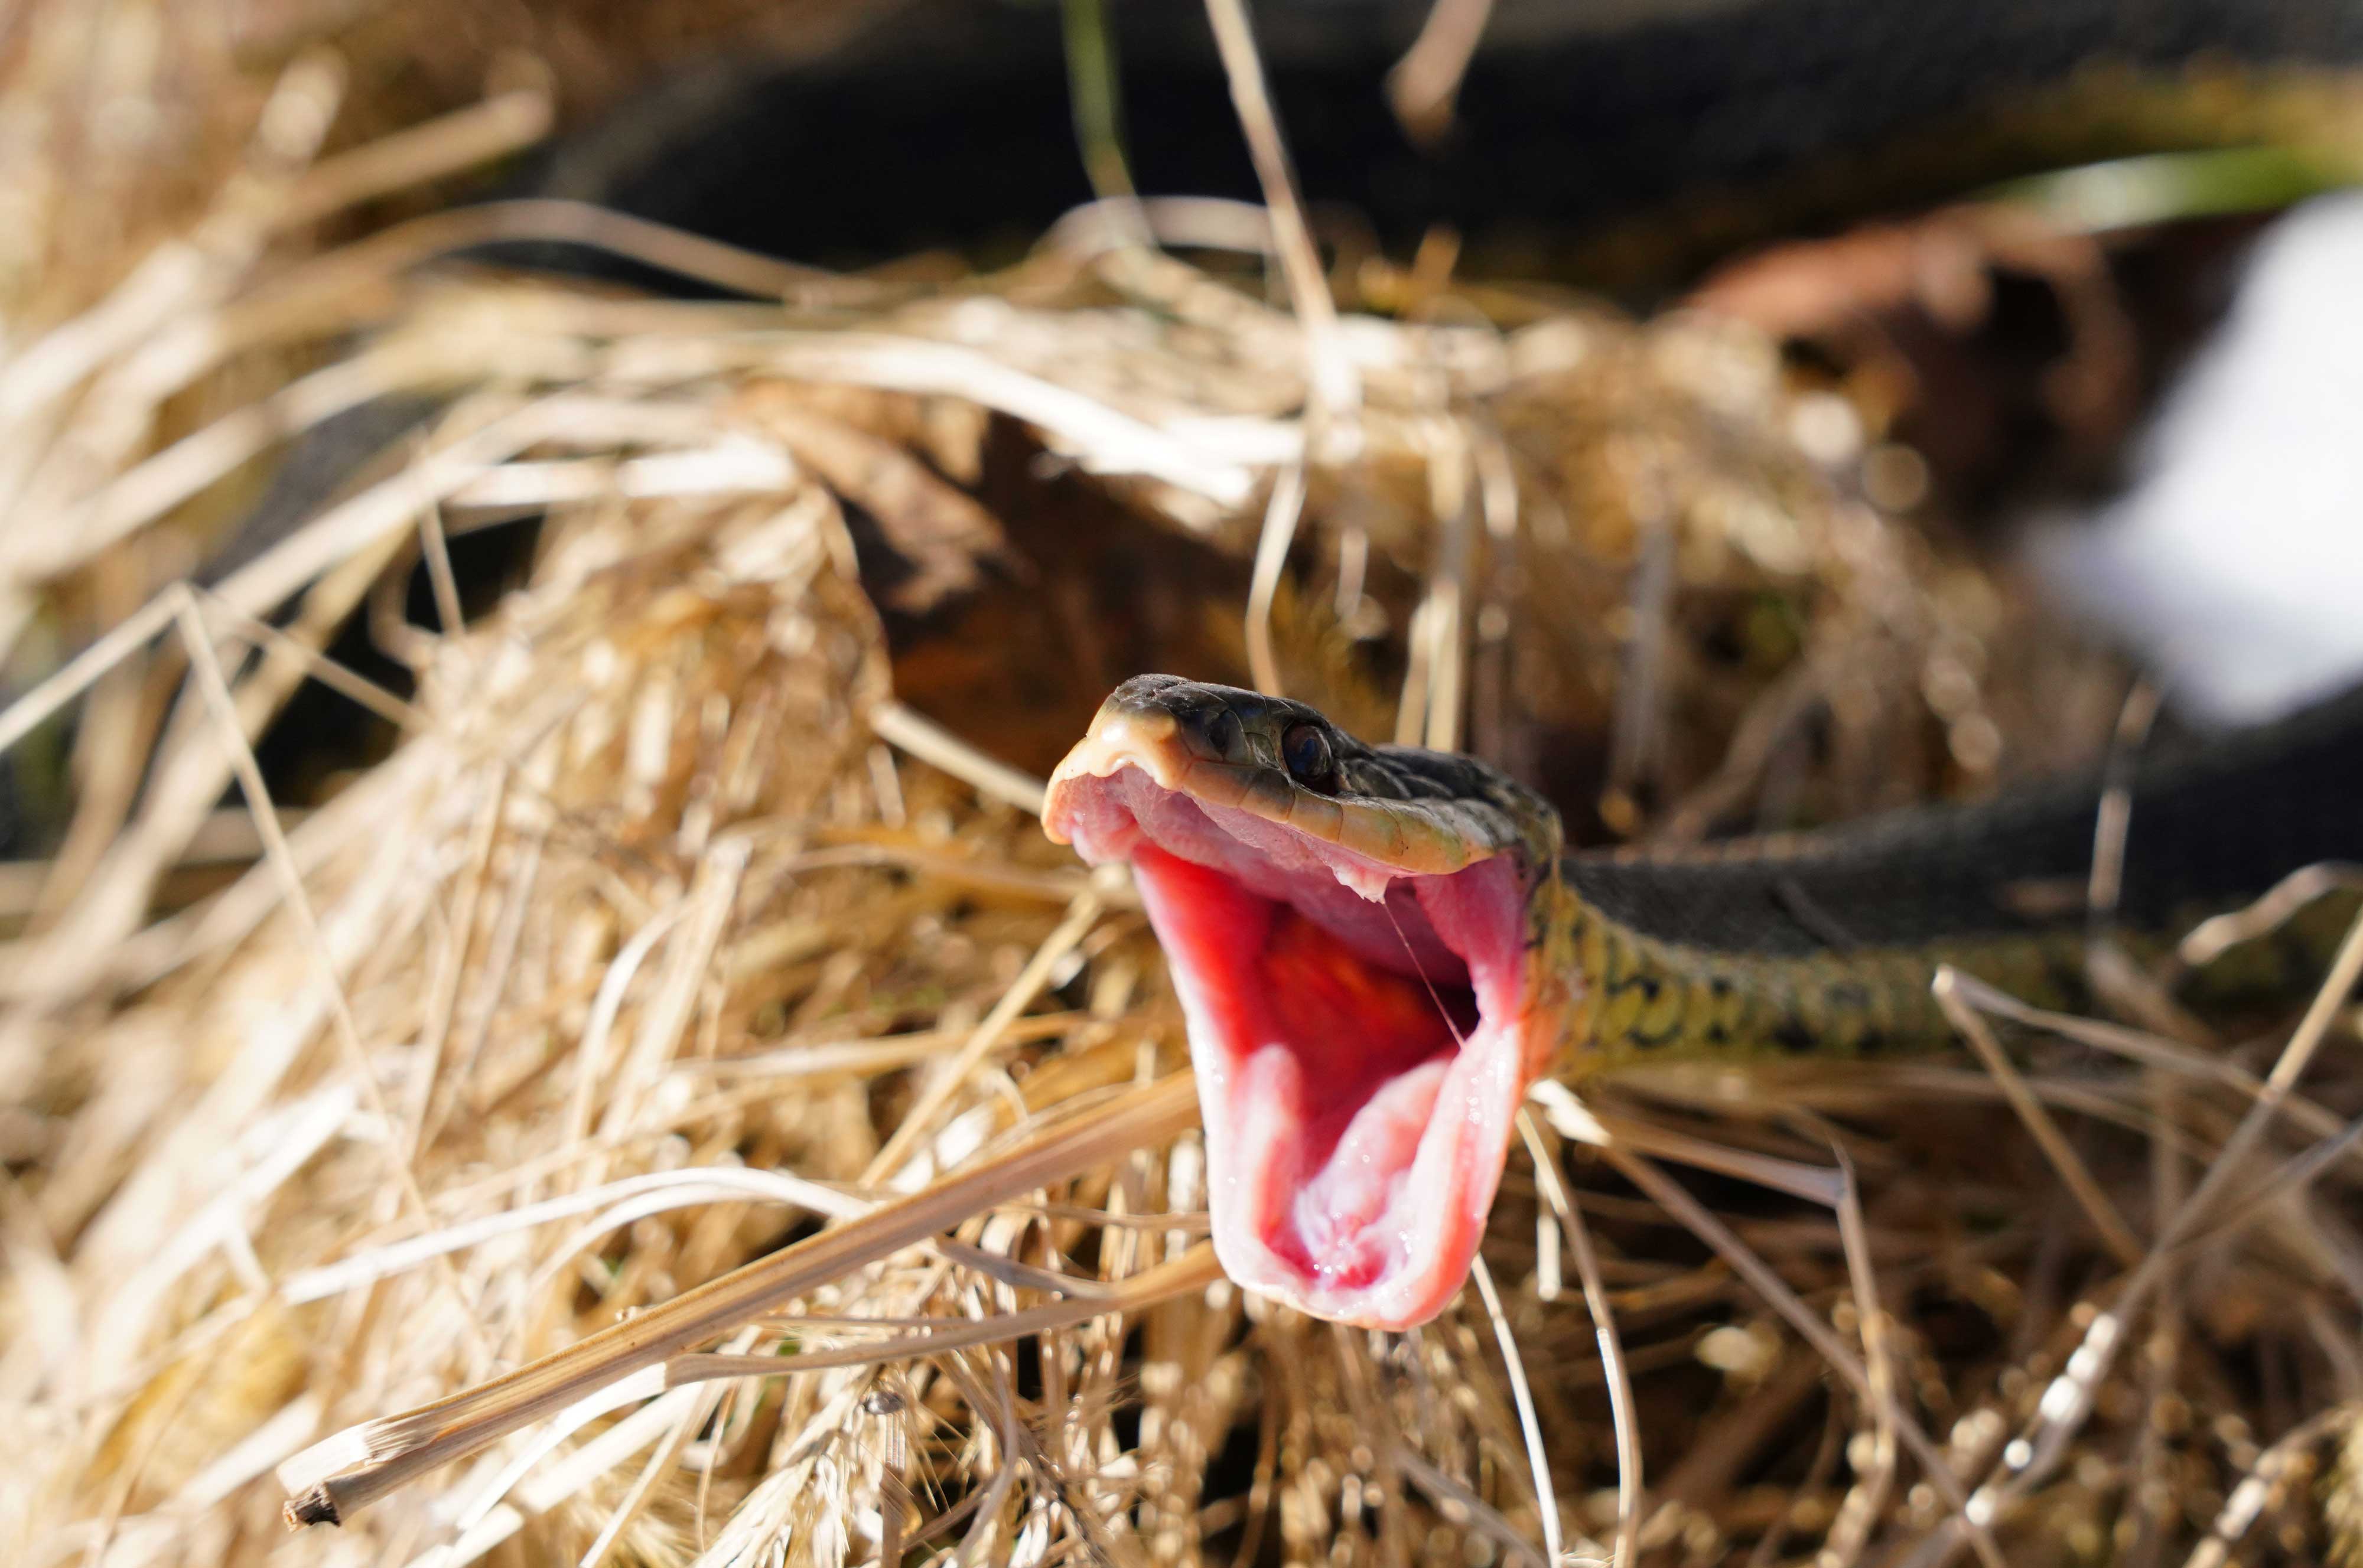 A common garter snake with its mouth open.